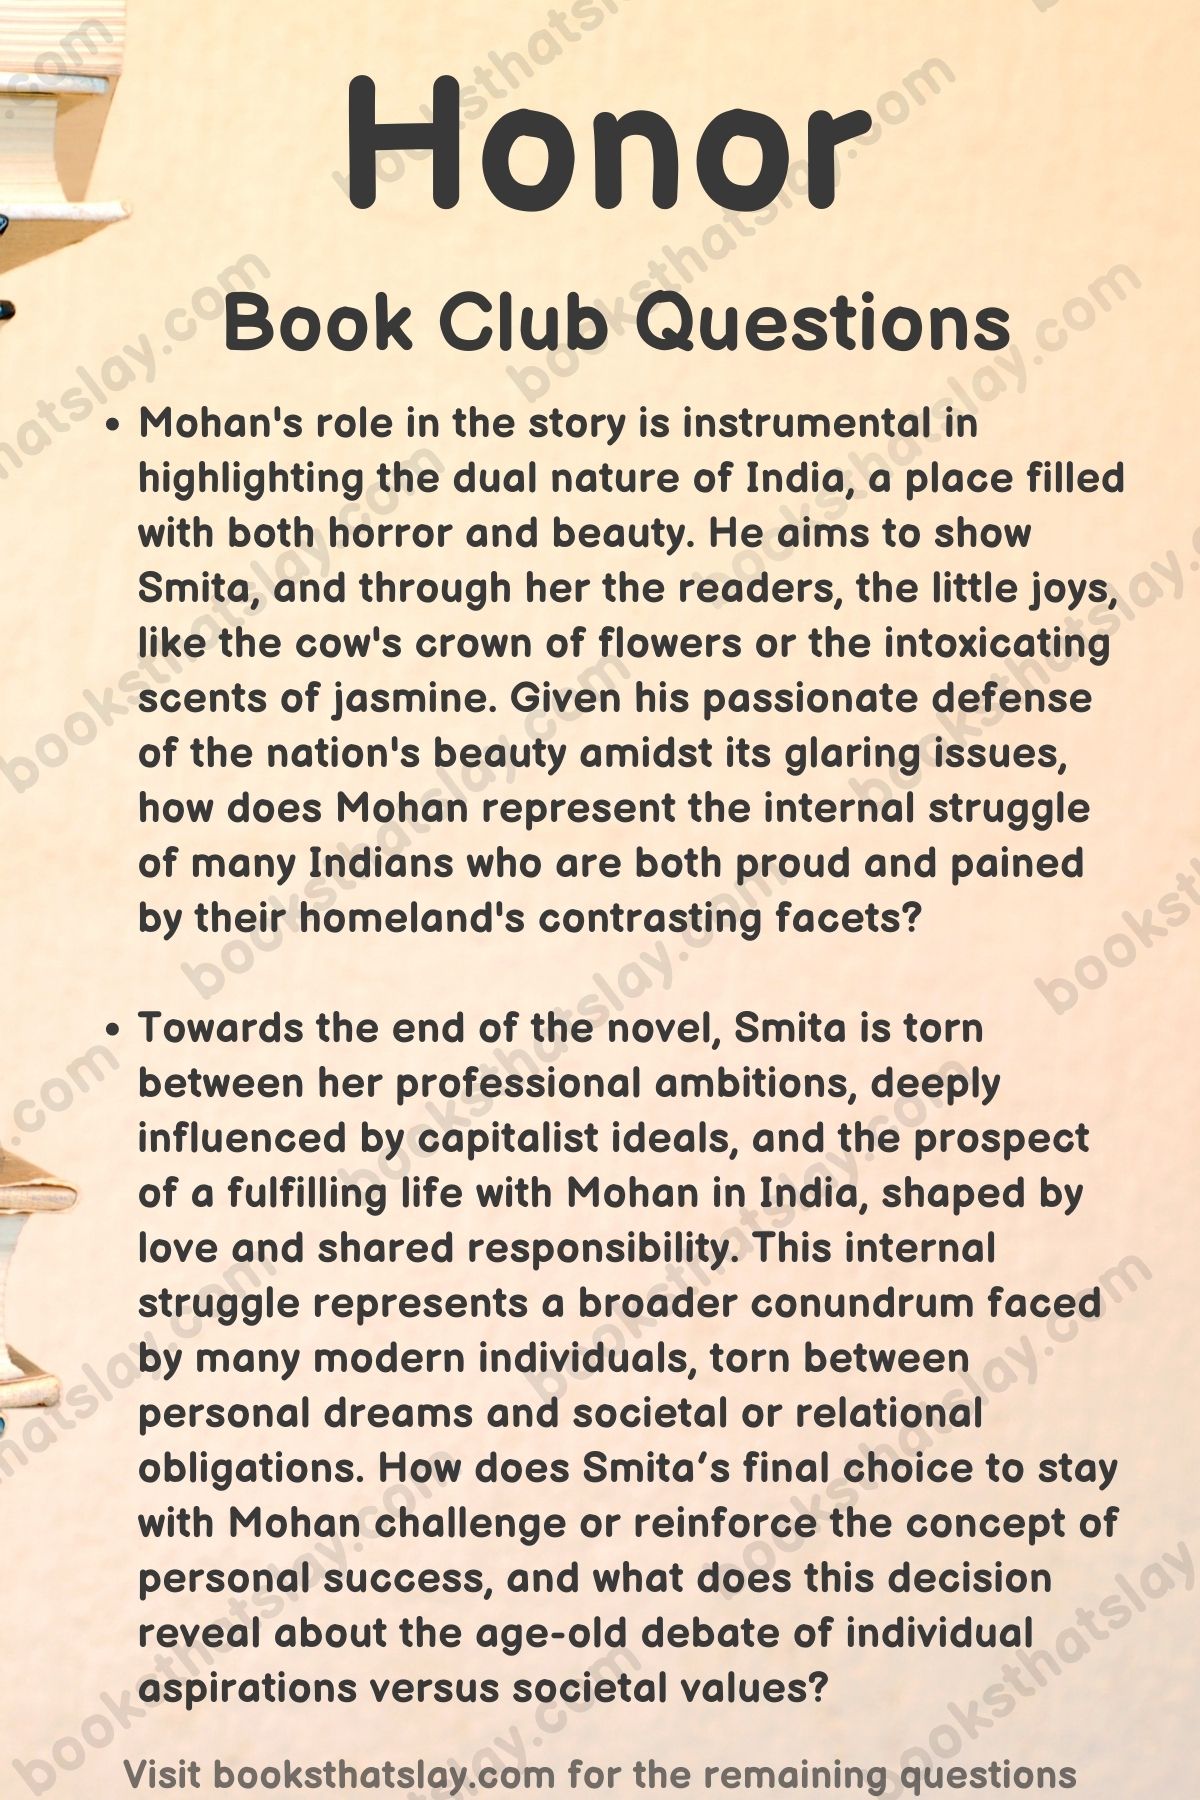 10 Book Club Questions for Honor by Thrity Umrigar